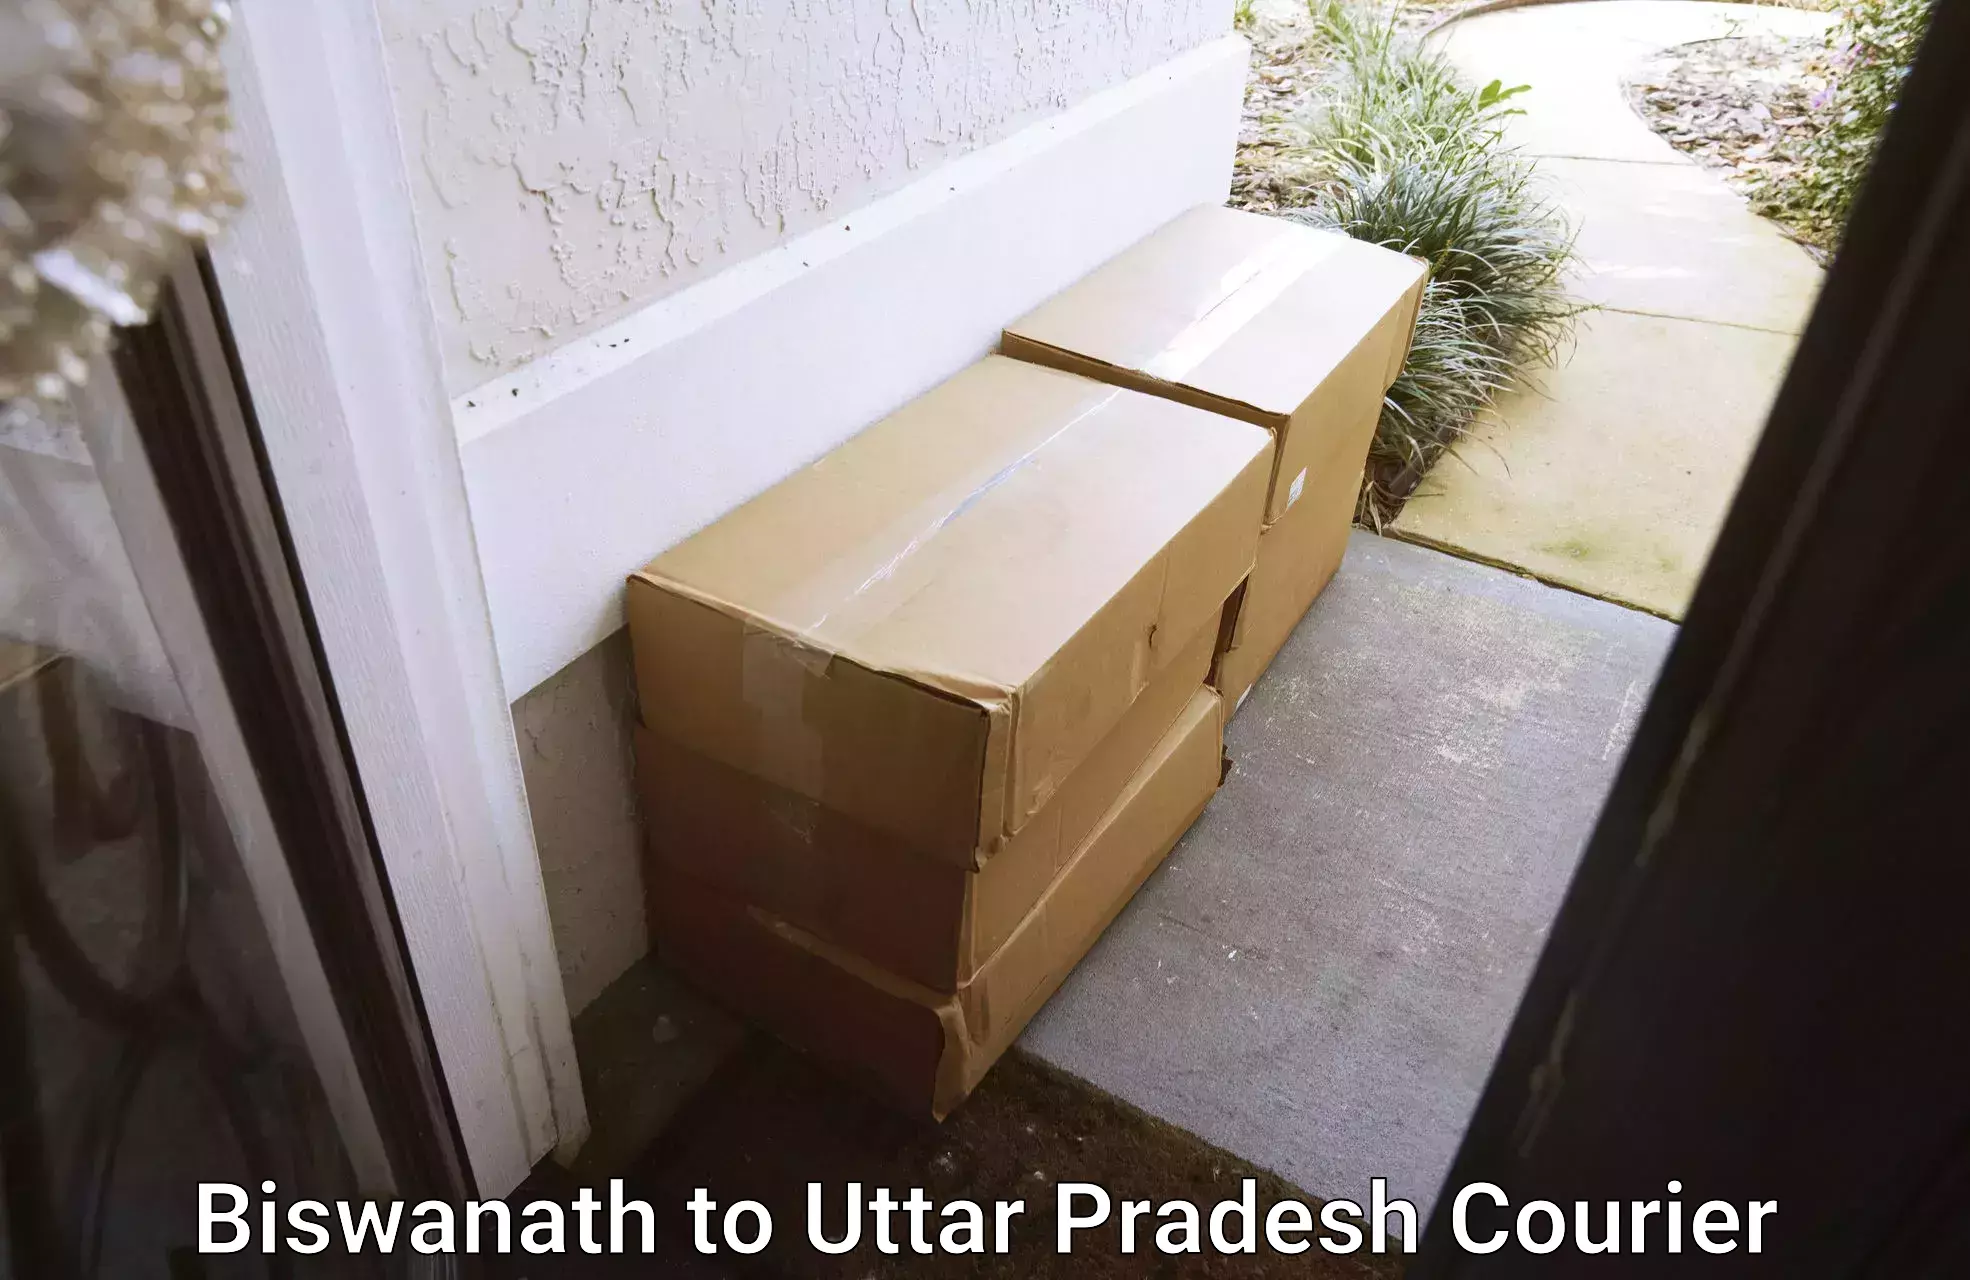 Custom courier packaging Biswanath to Noida